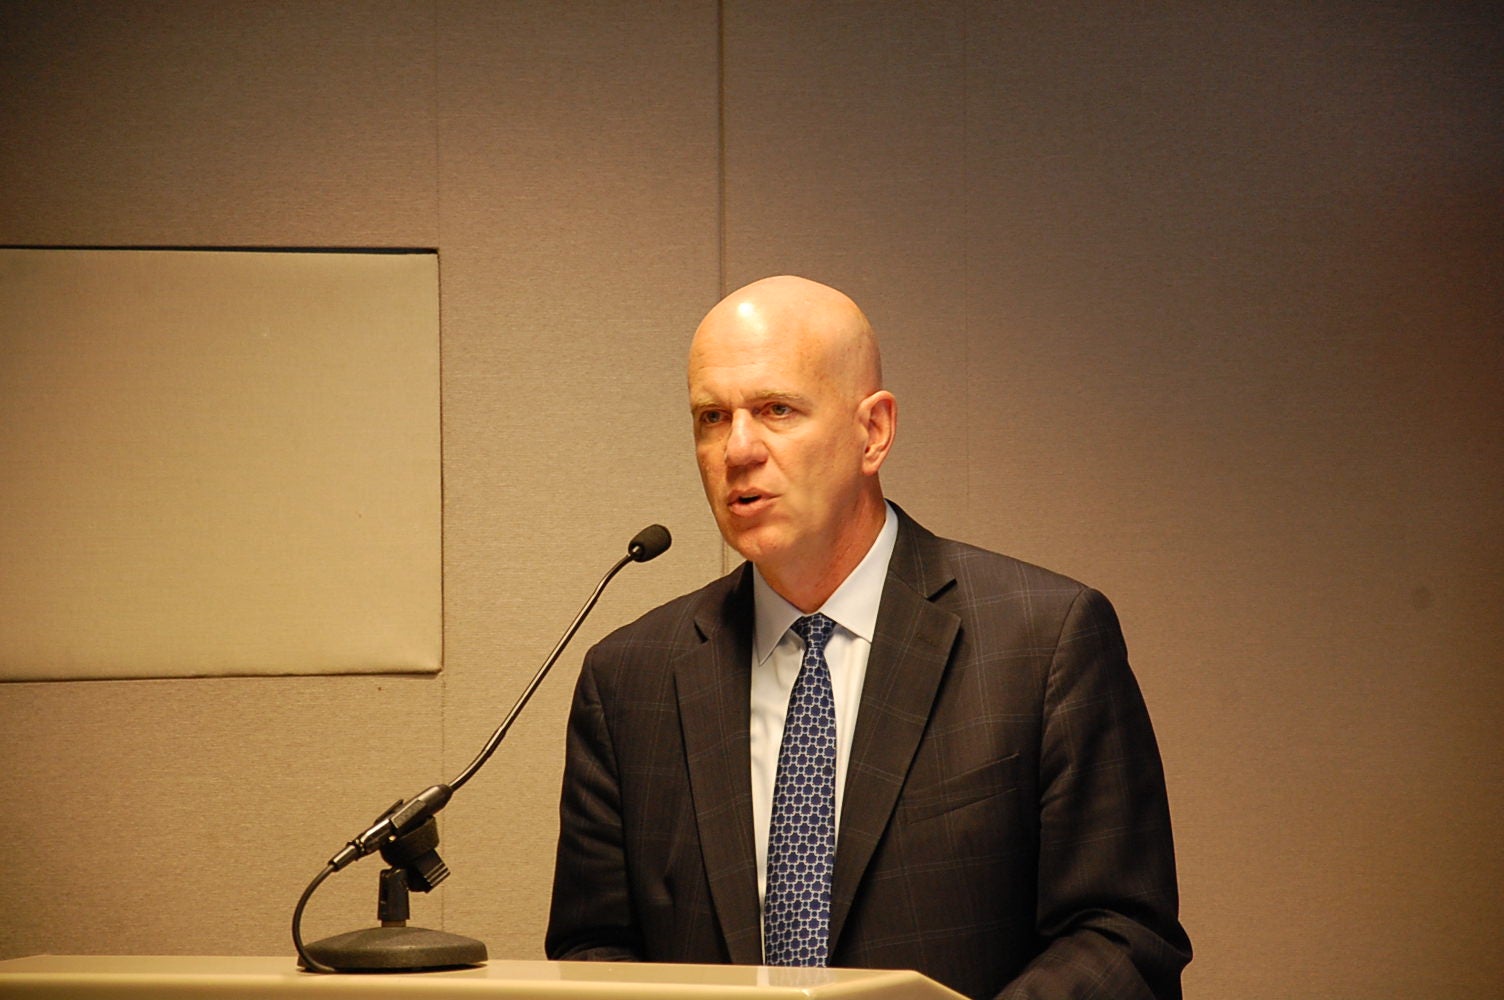 SEPTA's Jeff Kneuppel gives an update on their regional rail service (Tom MacDonald / WHYY)